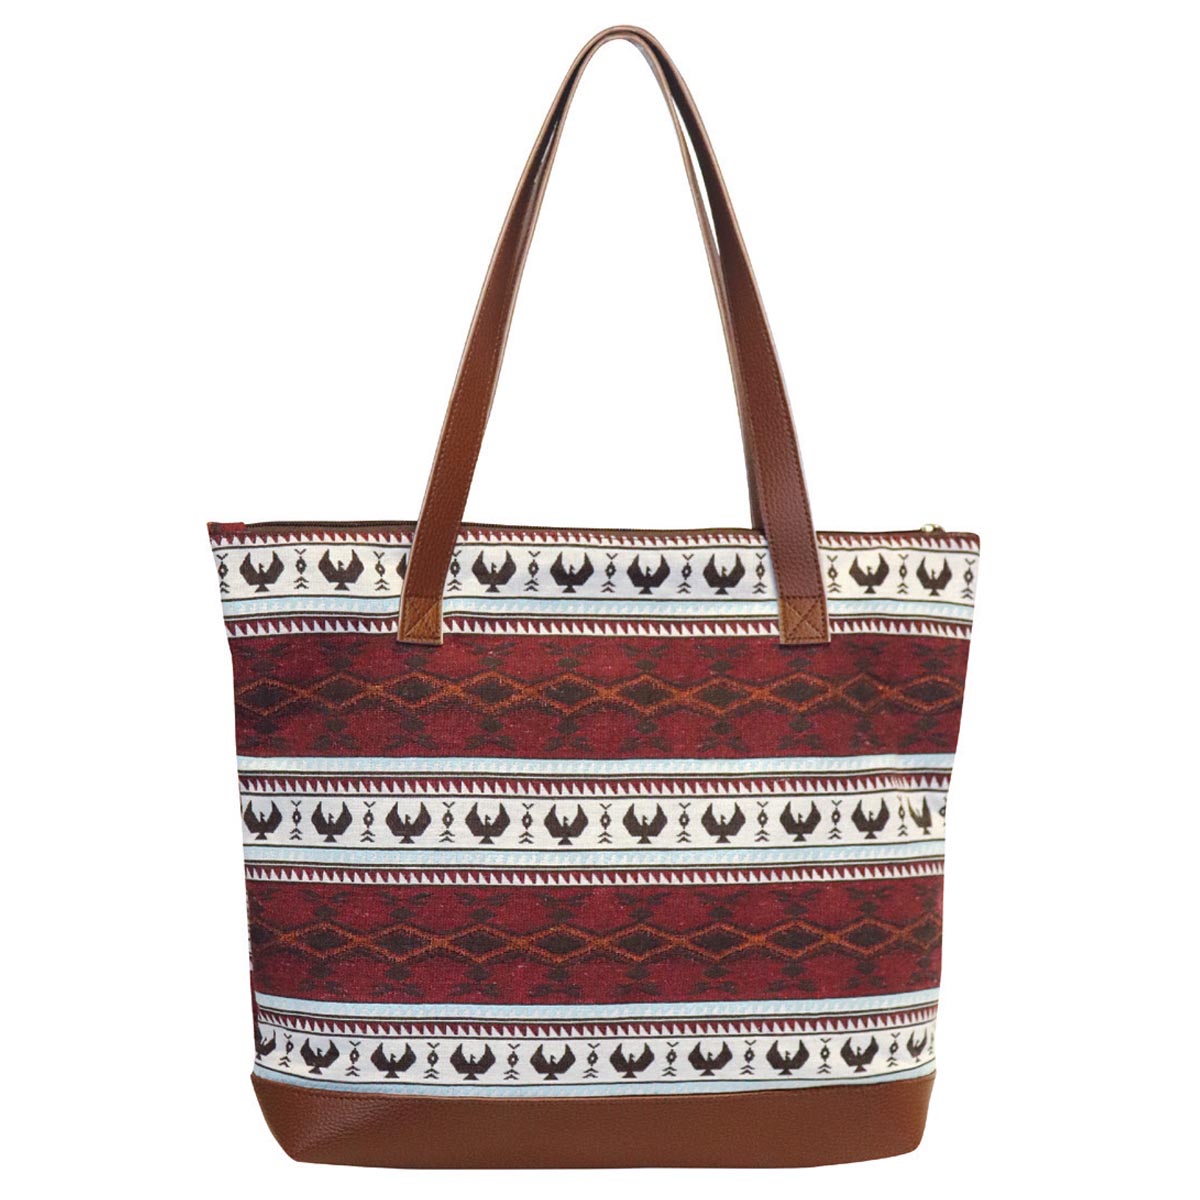 Tote Bag Spirit Of The Sky - Tote Bag Spirit Of The Sky -  - House of Himwitsa Native Art Gallery and Gifts